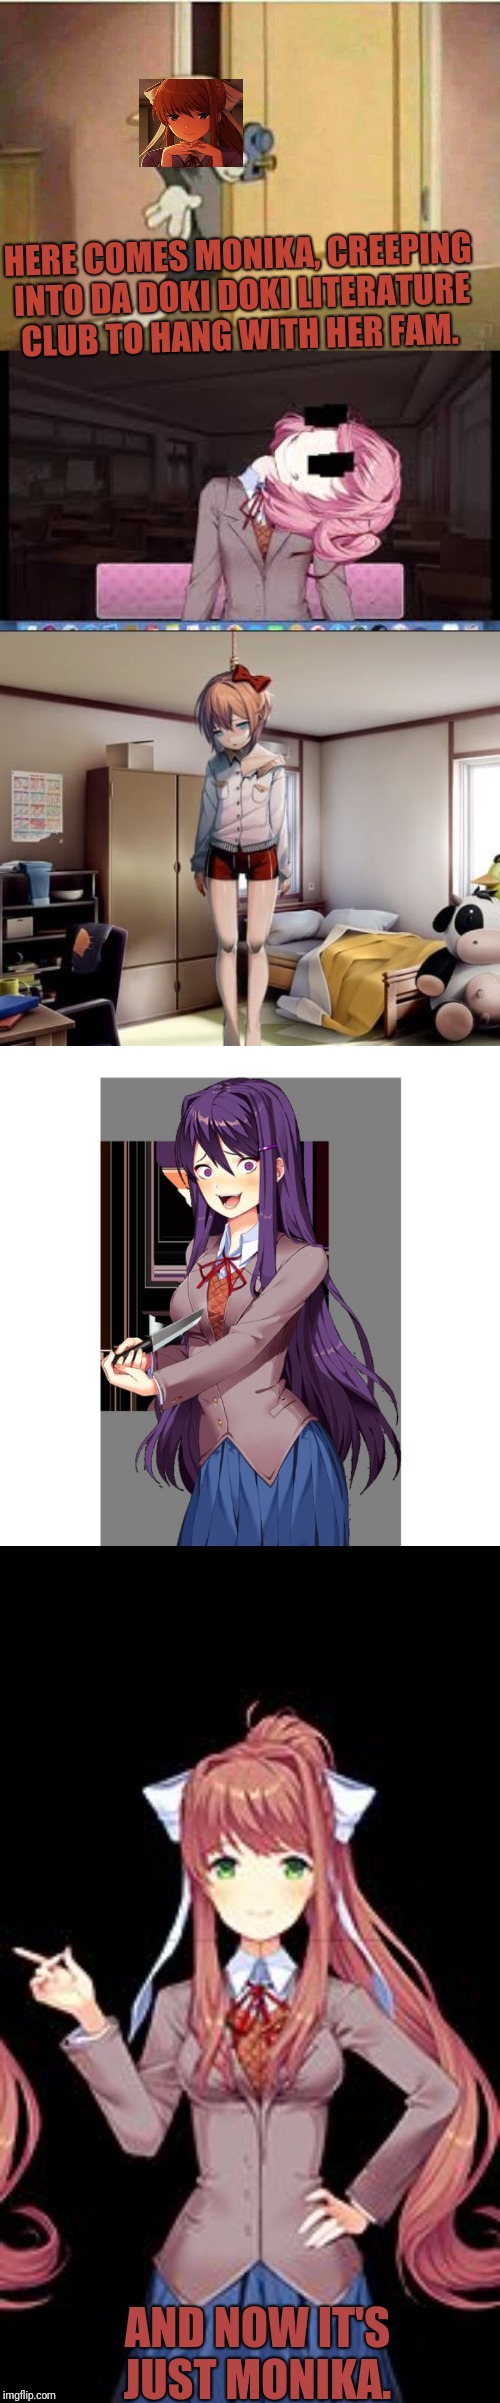 It's Monika. Just Monika. There can only be one best girl. And turns out Monika wants to be that best girl....  | HERE COMES MONIKA, CREEPING INTO DA DOKI DOKI LITERATURE CLUB TO HANG WITH HER FAM. AND NOW IT'S JUST MONIKA. | image tagged in monika,yuri,natsuki,sayori,ddlc,well that escalated quickly | made w/ Imgflip meme maker